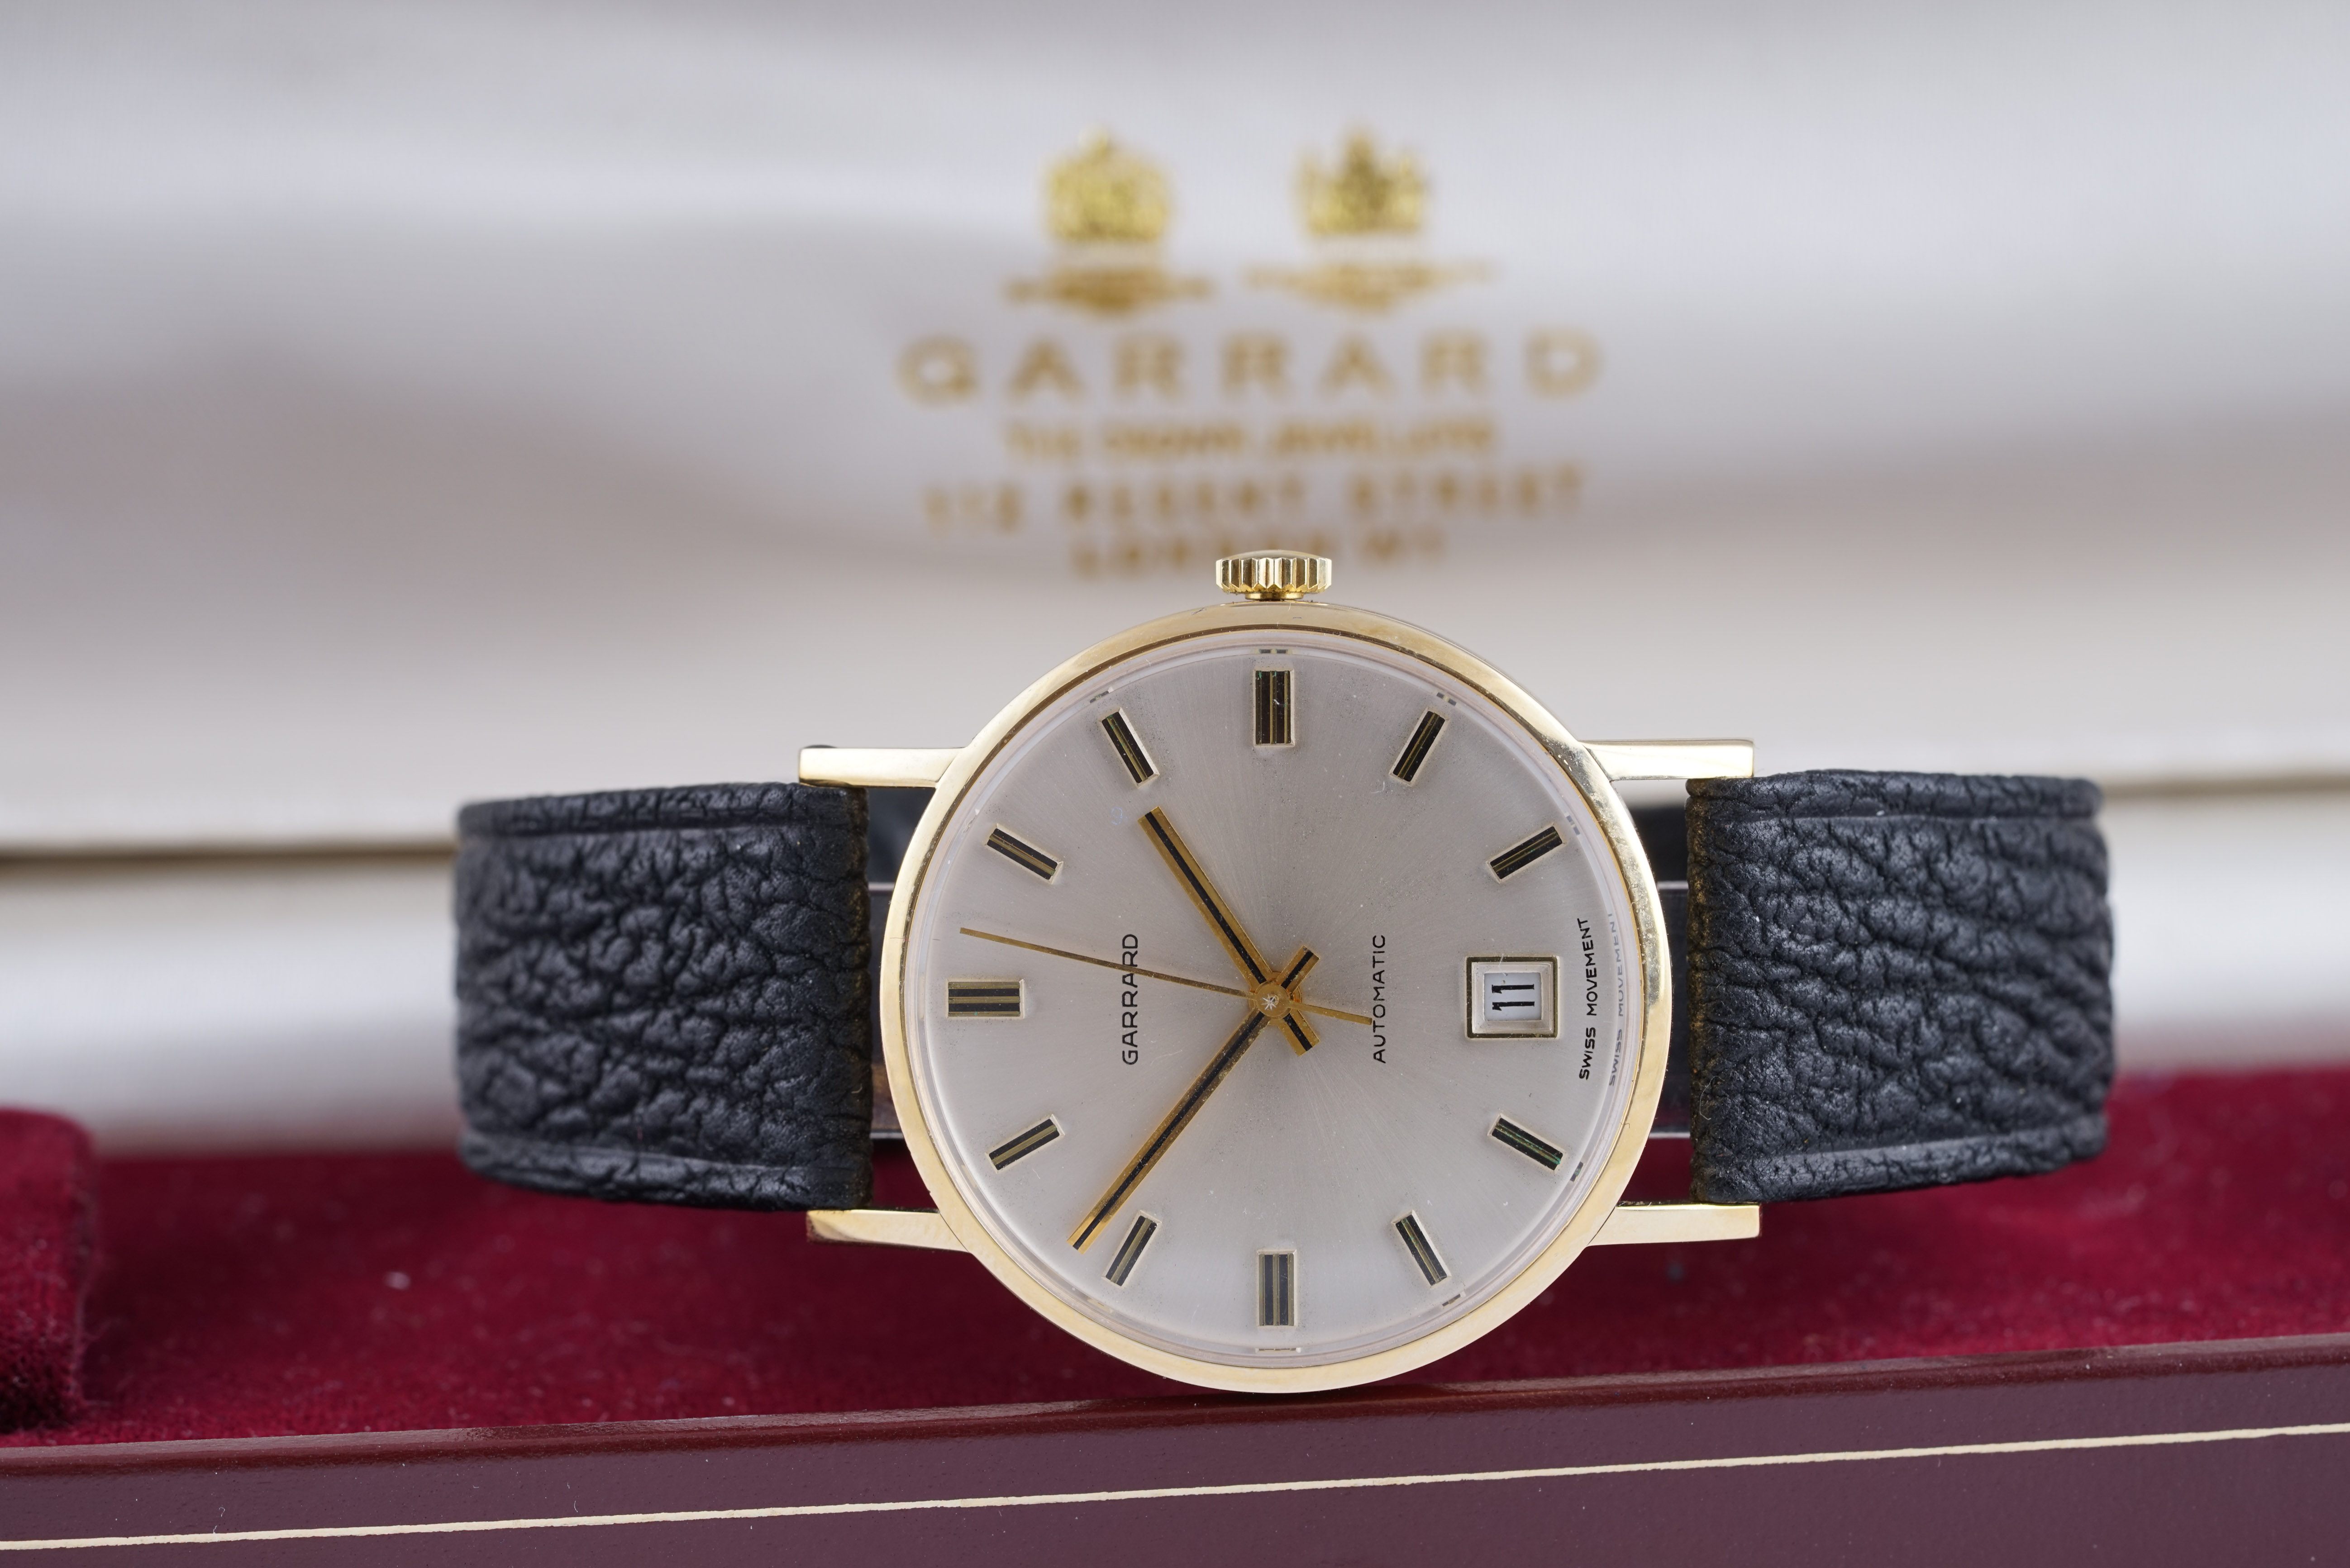 GENTLEMENS GARRARD AUTOMATIC 9CT GOLD WRISTWATCH W/ BOX, circular silver dial with applied hour